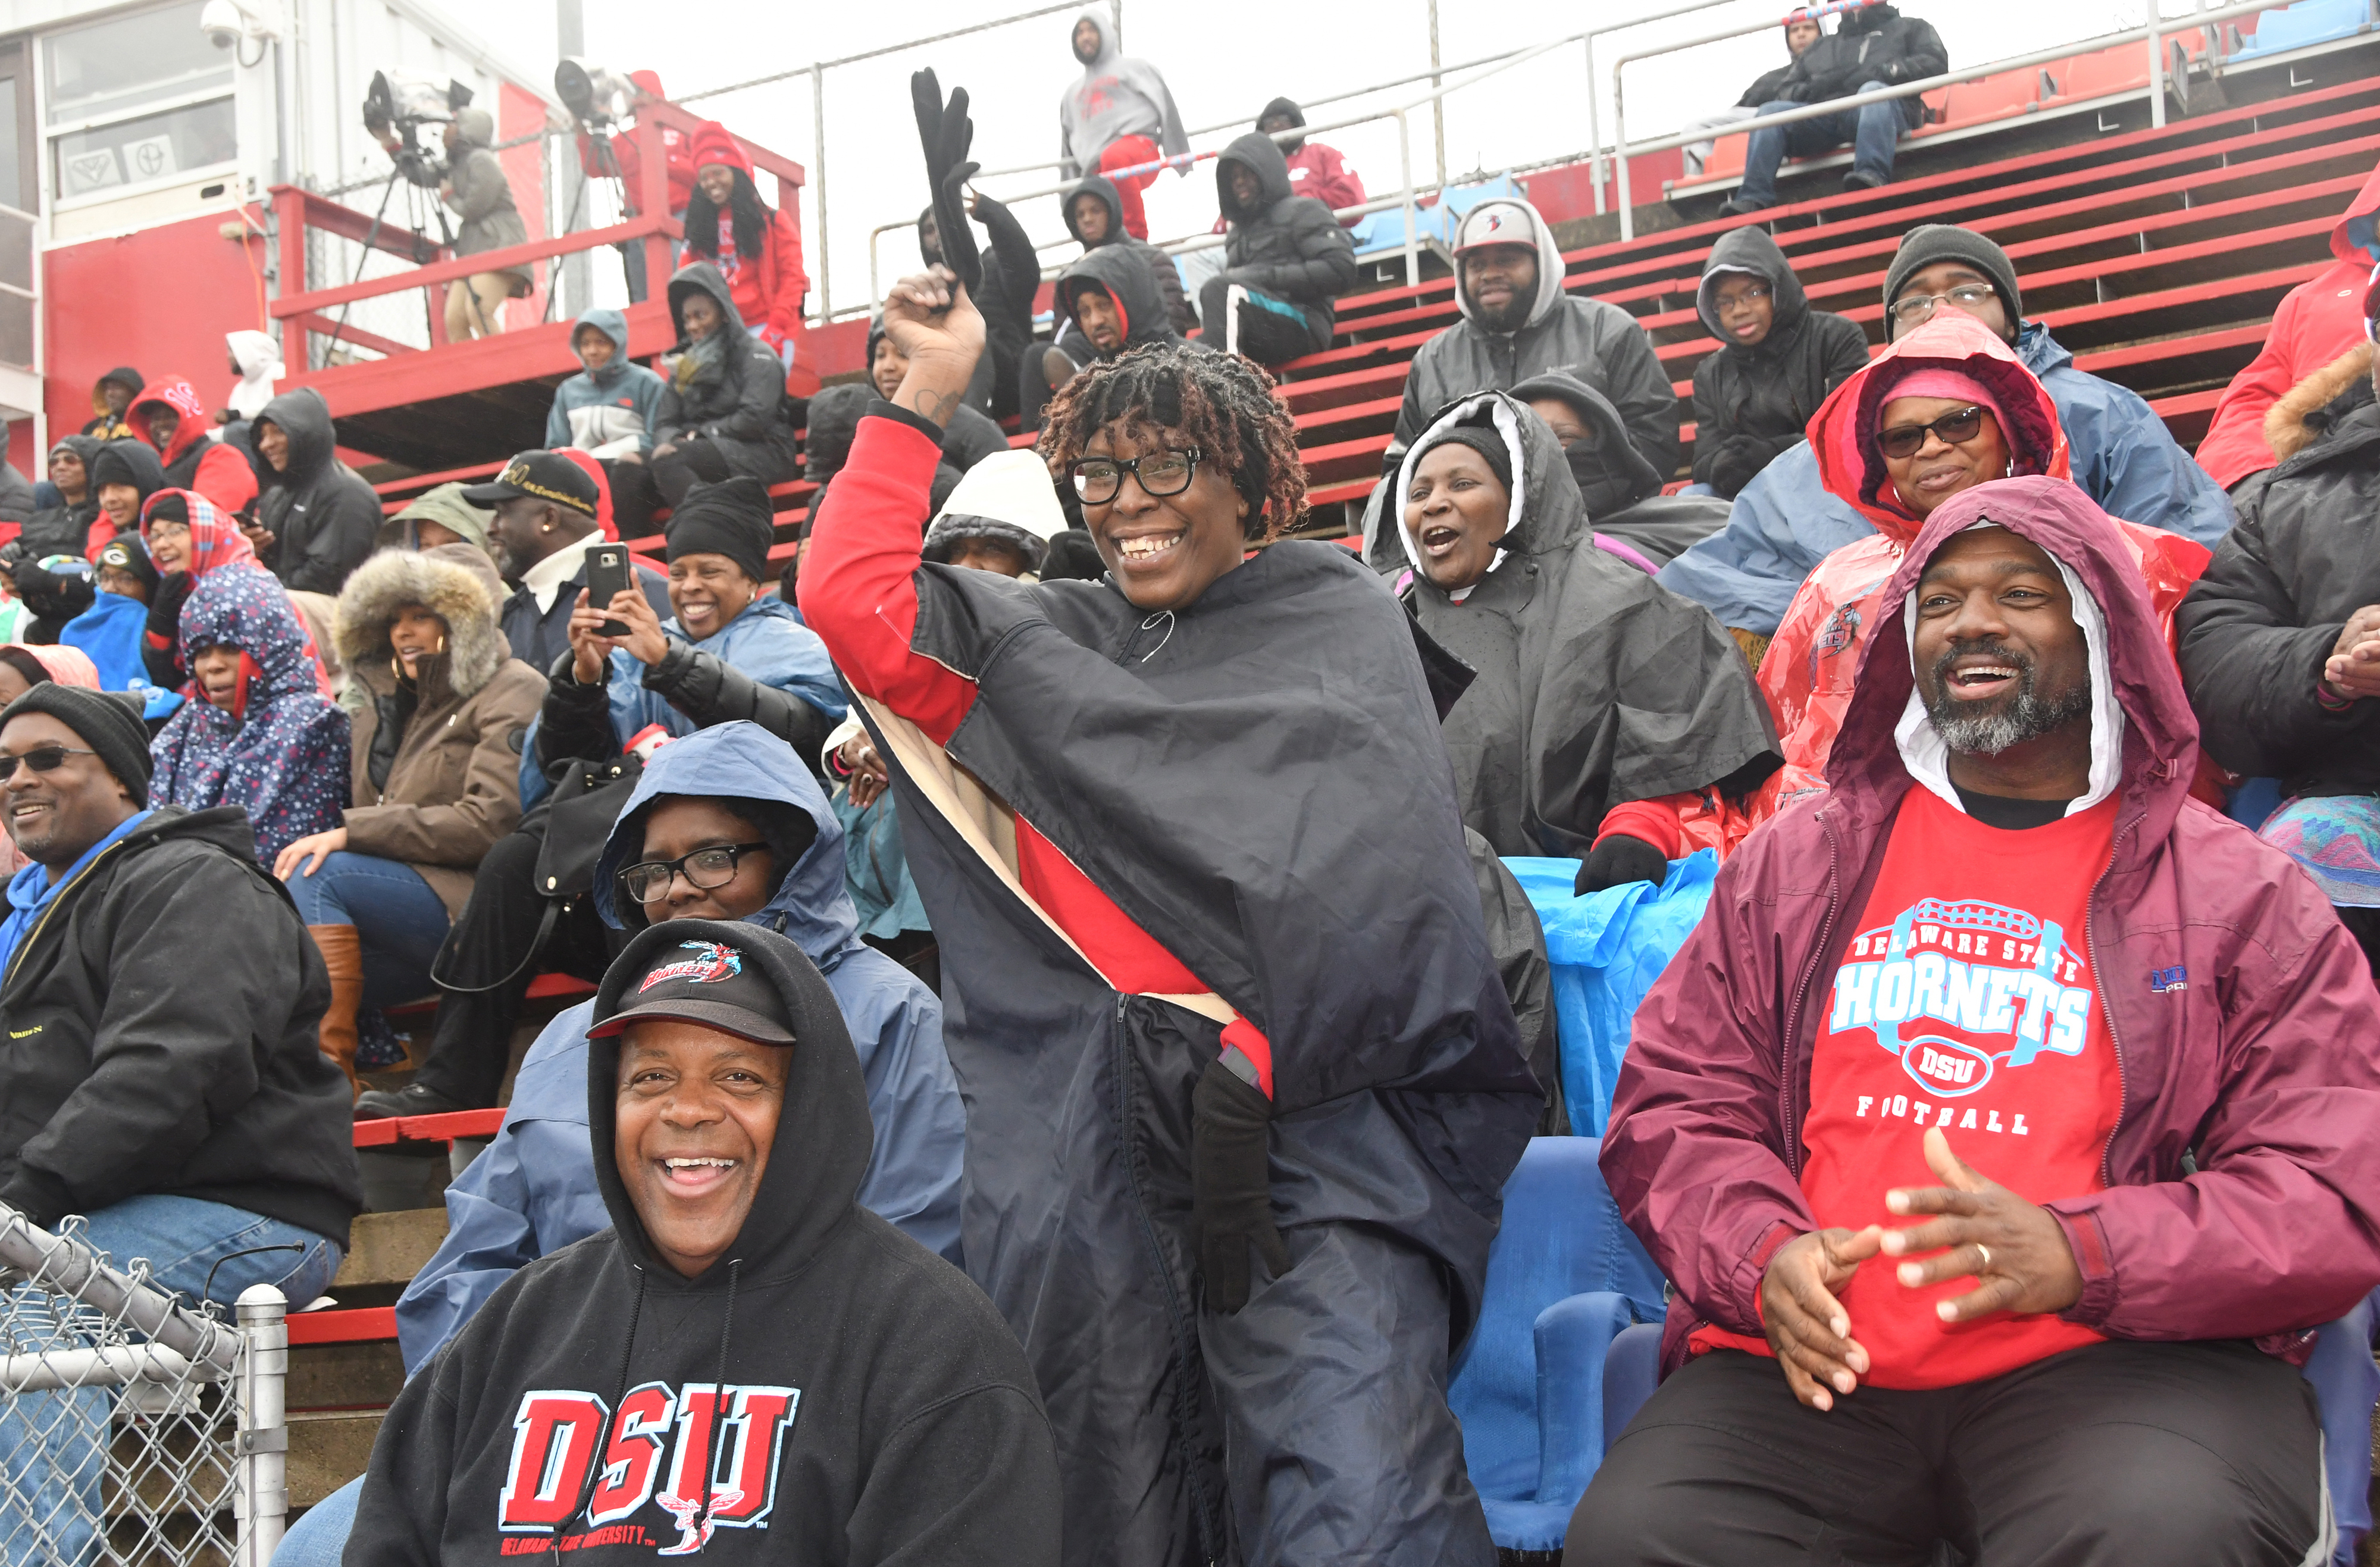 The  Hornet Homecoming crowd were not disappointment their University's performance on the gridiron, as Delaware State University beat North Carolina Central 28-13.